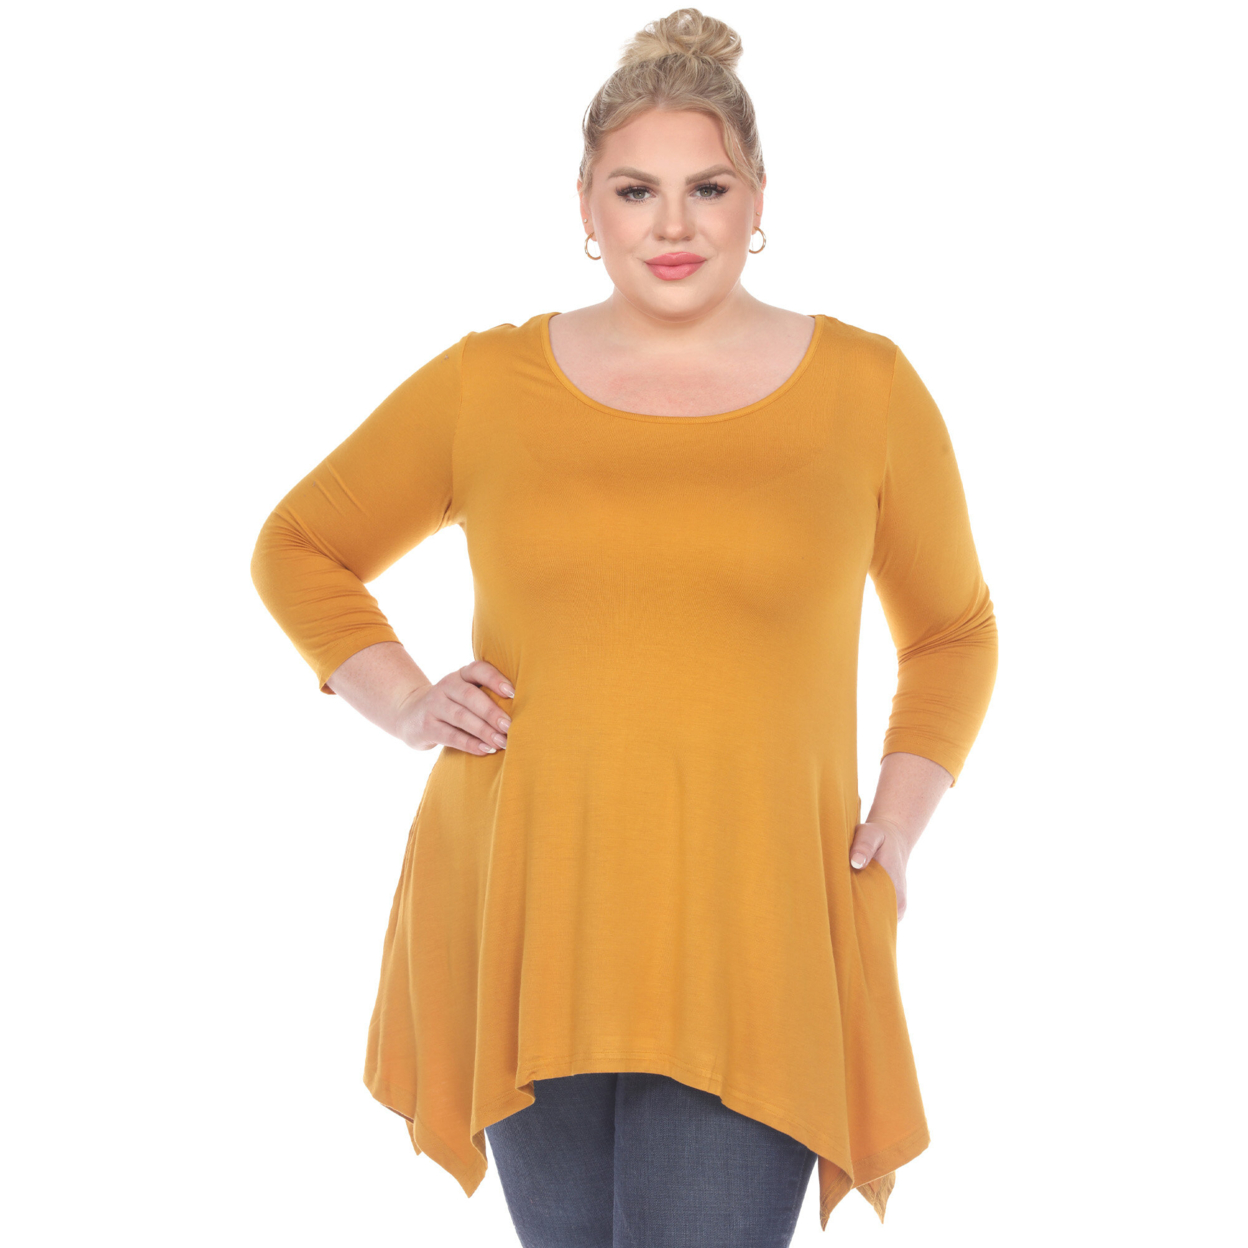 White Mark Women's Quarter Sleeve Tunic Top With Pockets - Mustard, X-Large